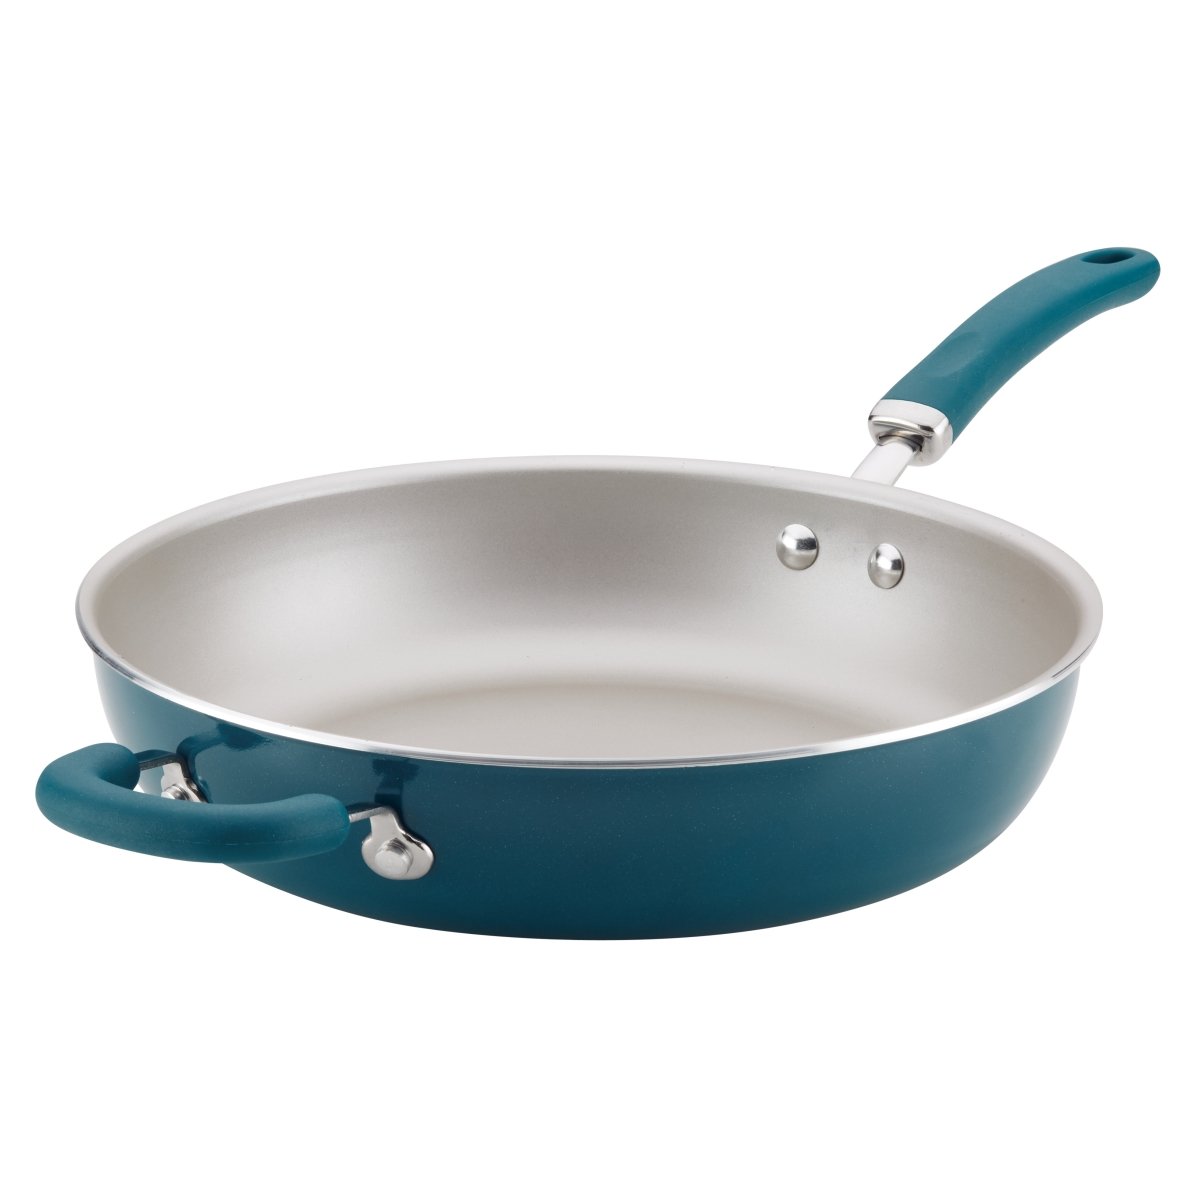 12012 Create Delicious Aluminum Nonstick Deep Skillet, 12.5 In. - Teal Shimmer